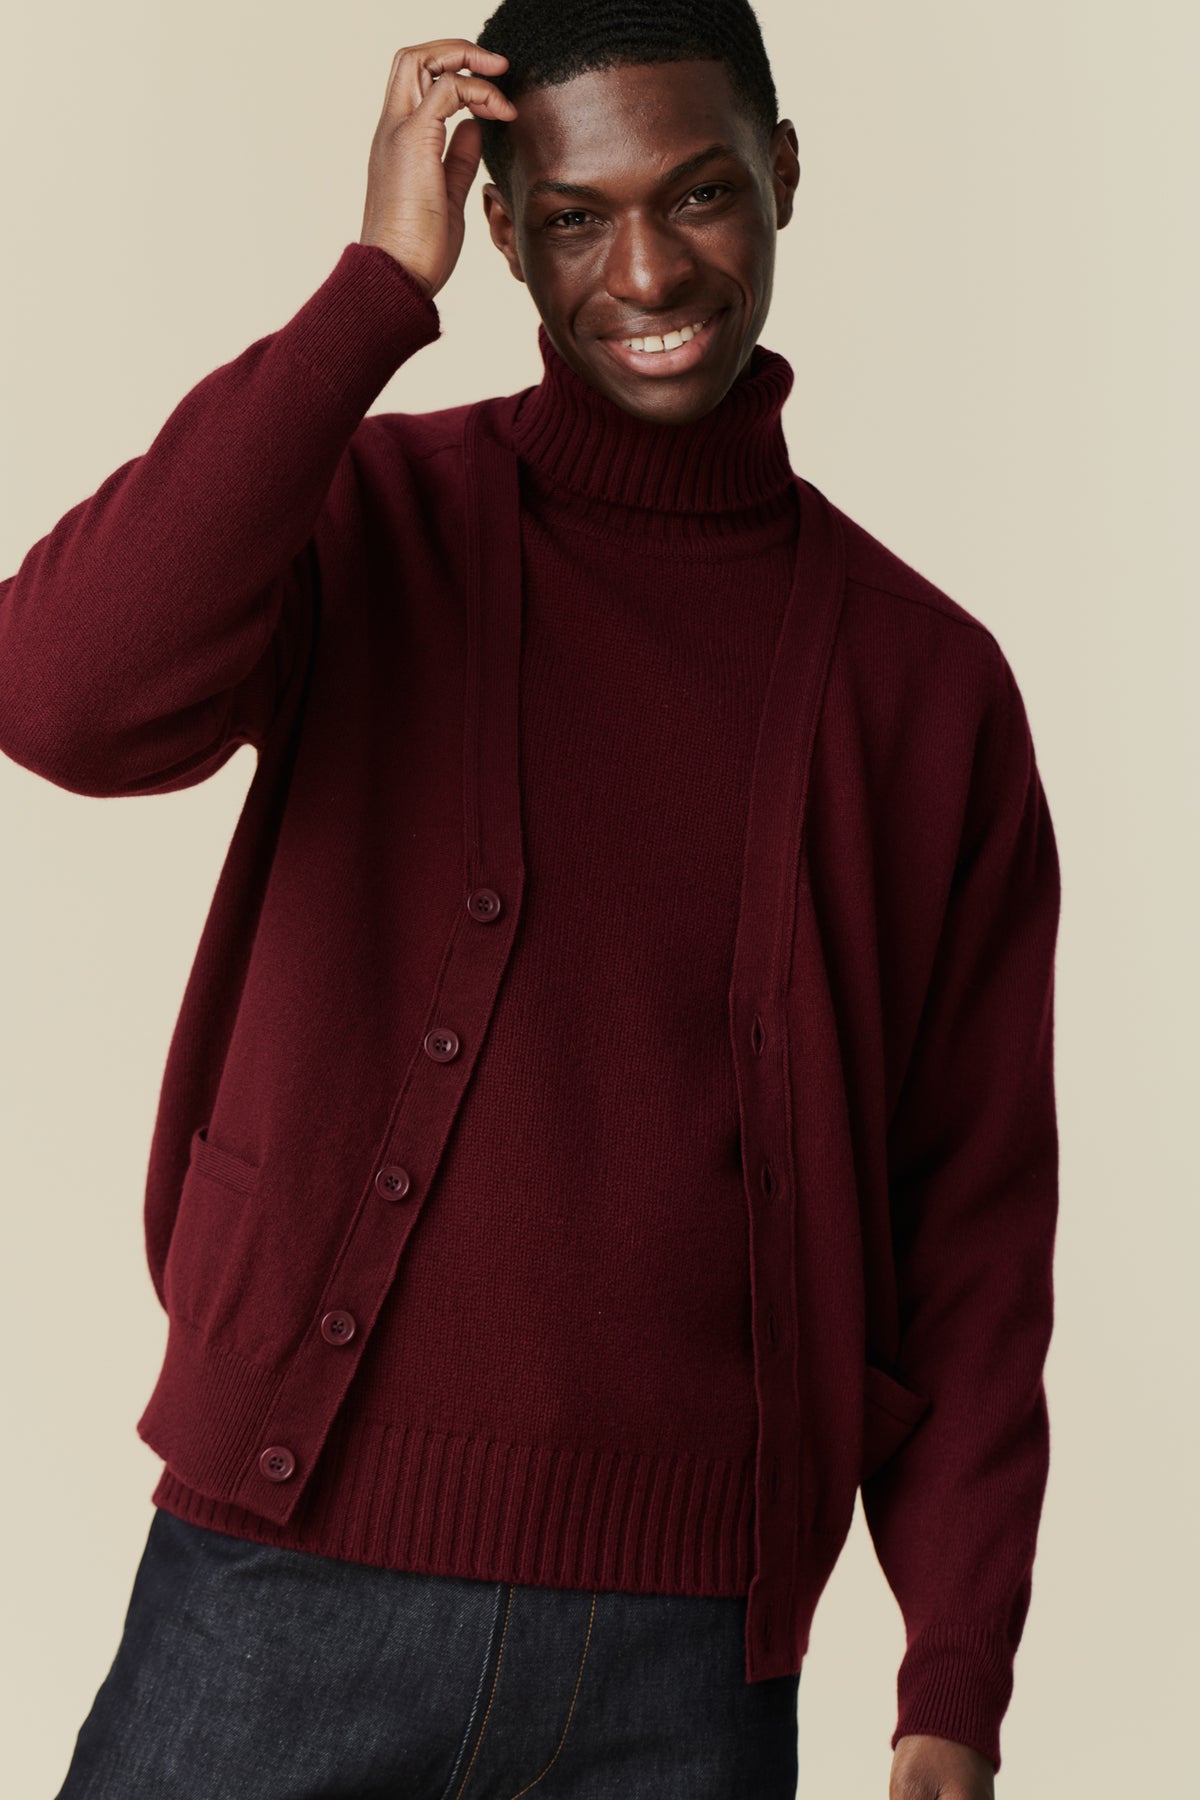 
            Male wearing lambswool v neck cardigan in burgundy over burgundy roll neck